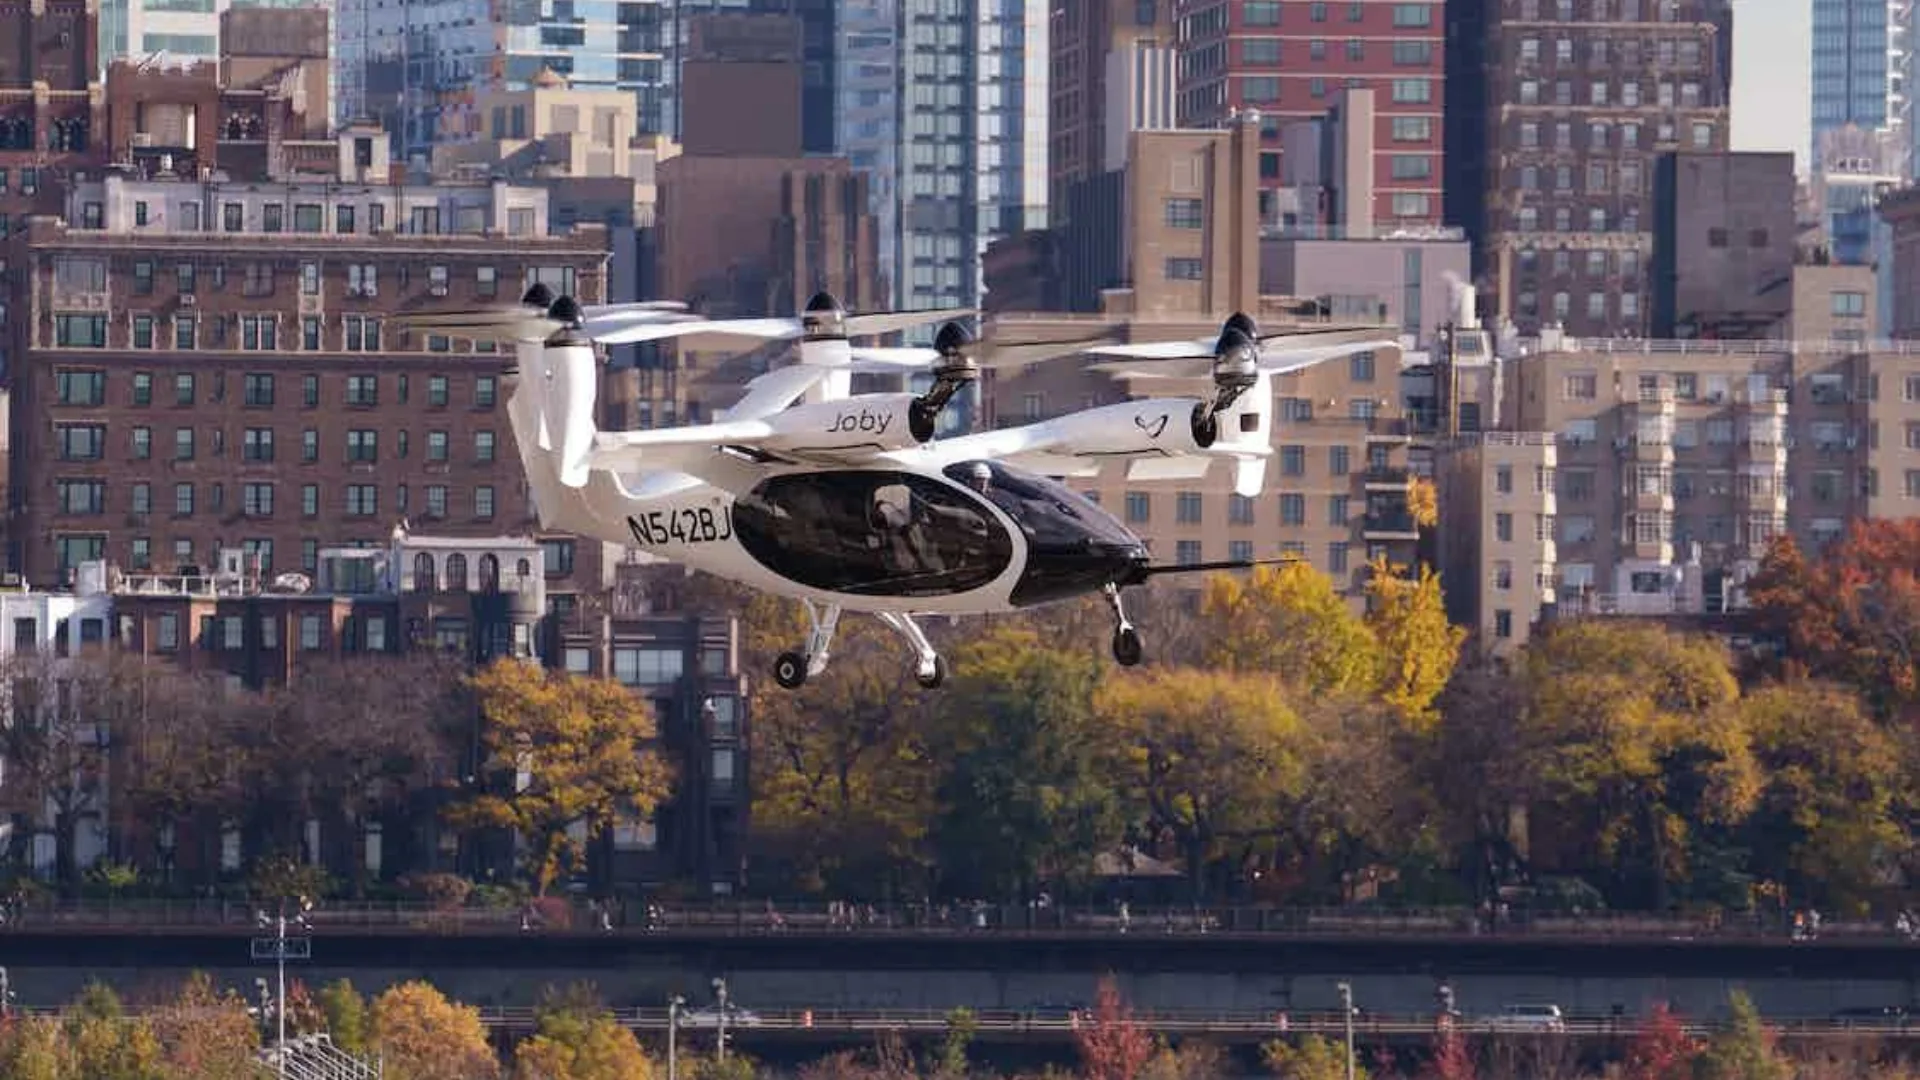 Joby Electric Air Taxi